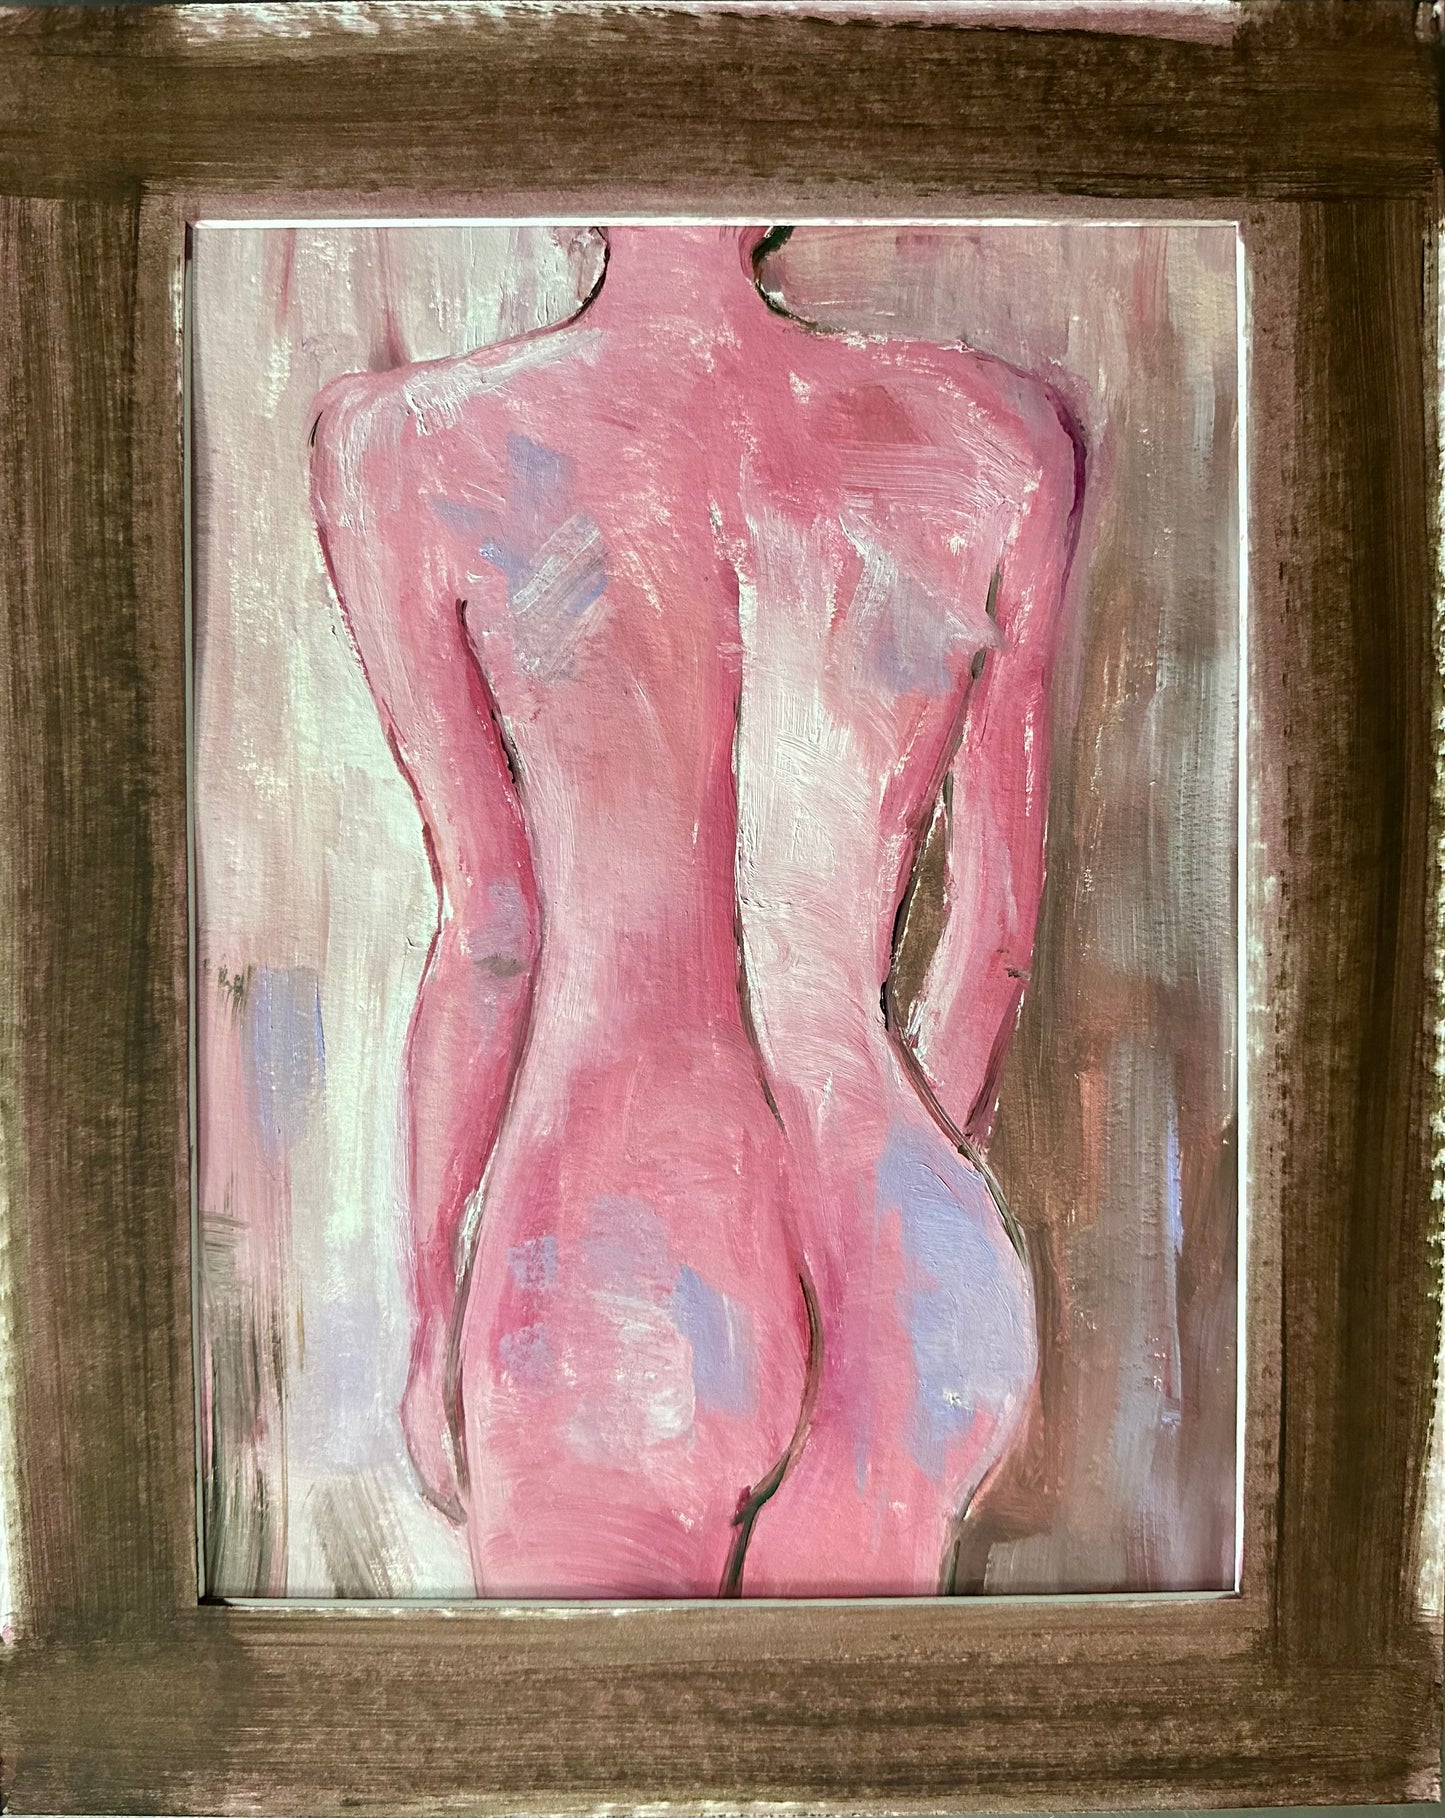 Nude study in Pink #1